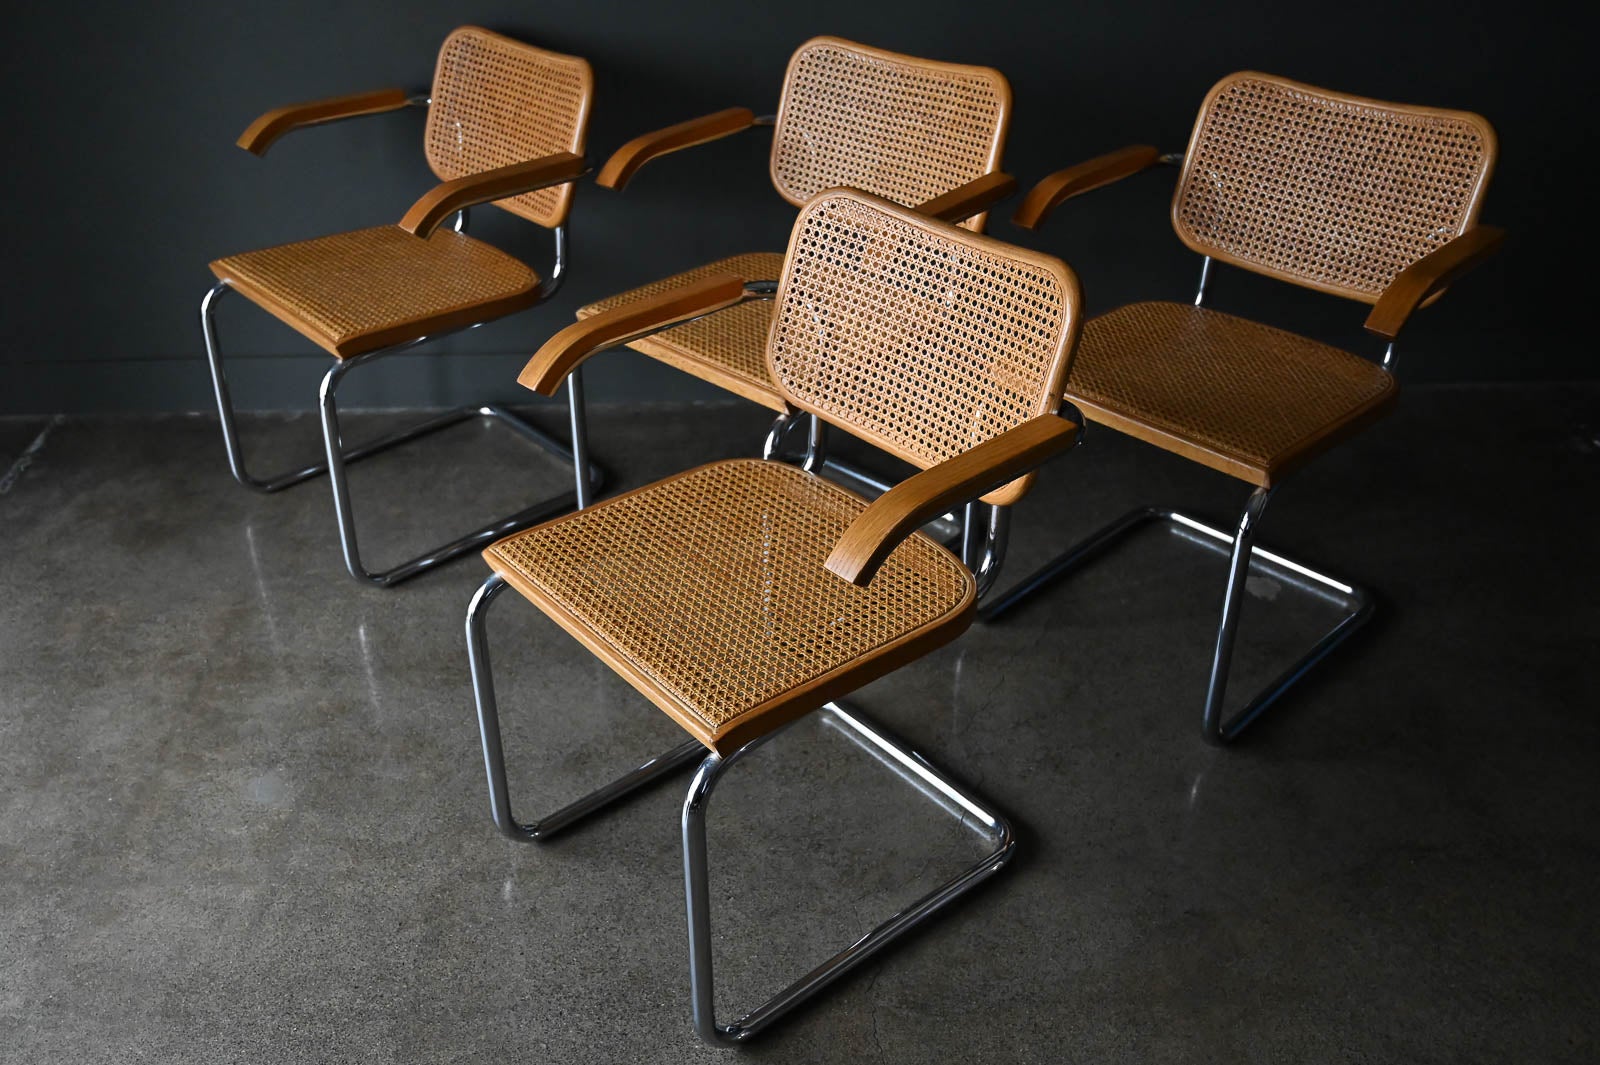 Marcel Breuer for Knoll Cesca Chairs, ca. 1960. Pristine condition, these 4 chairs have the older Knoll label on underside. Cane is perfect and wood frames have no cracks or chips. Hardly used from original owner estate. Originally designed by